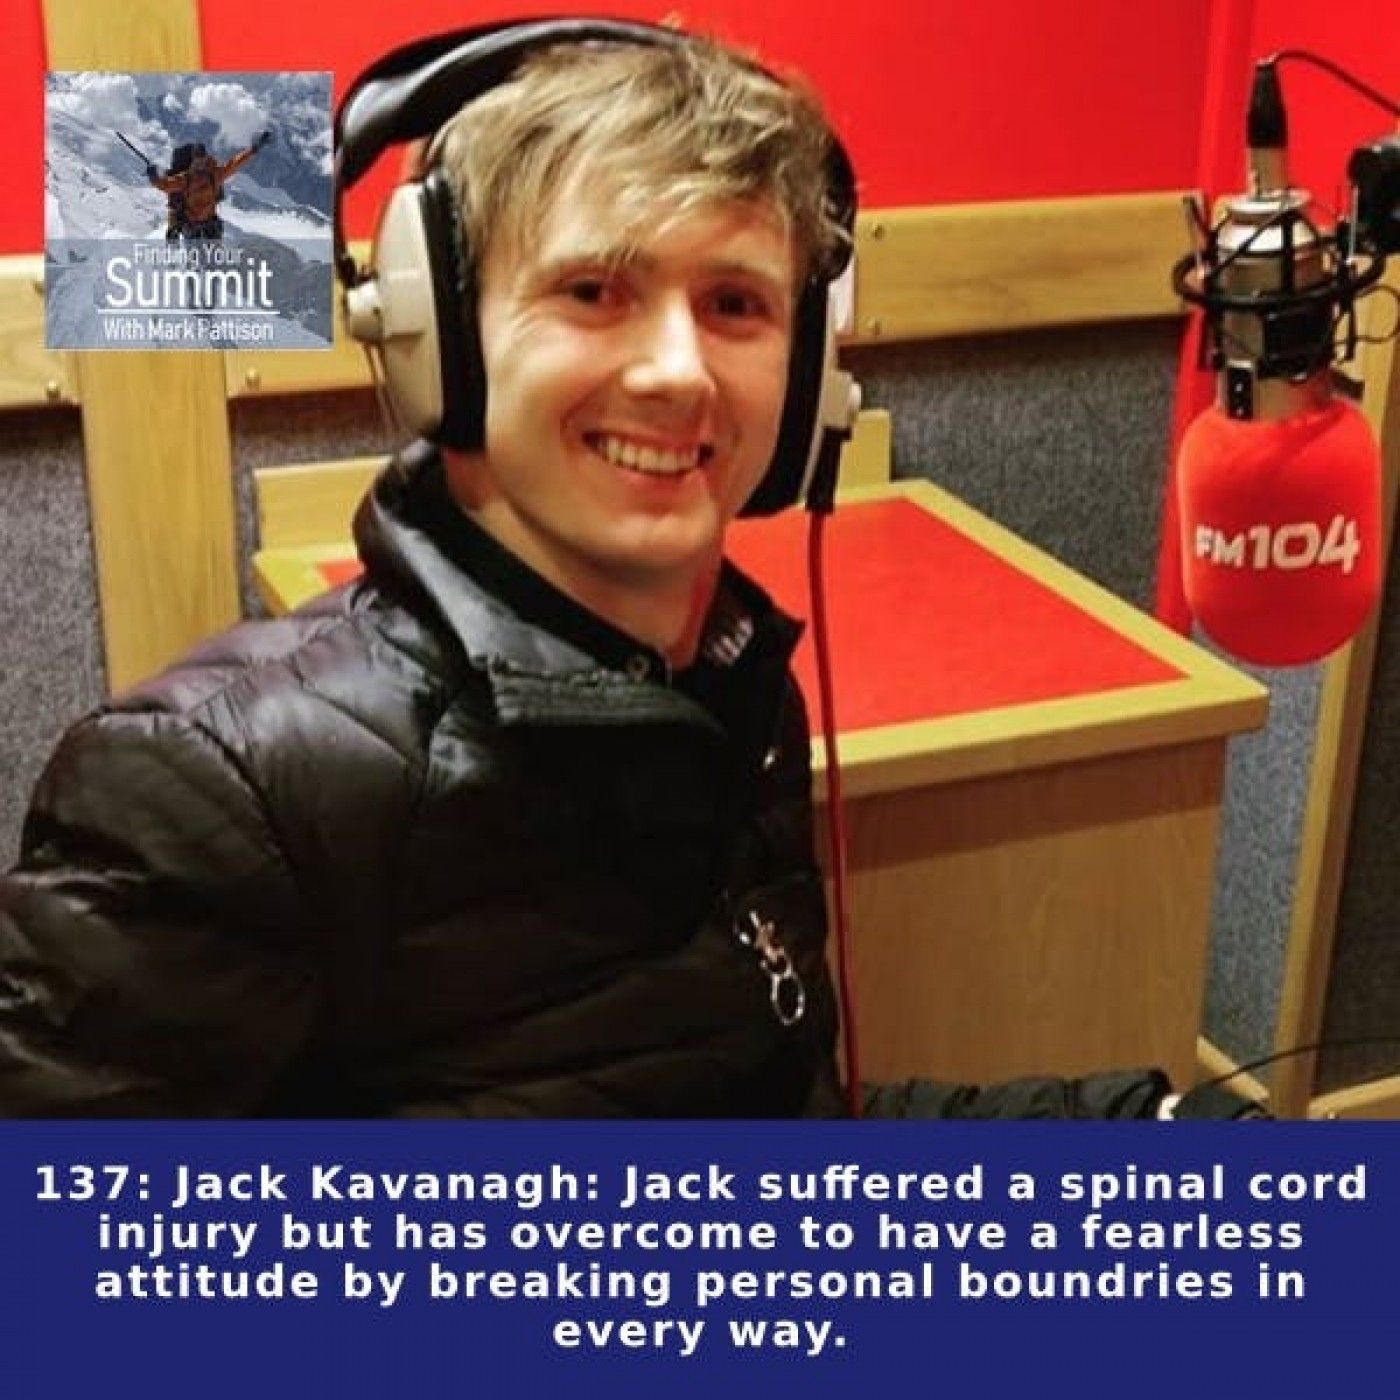 Jack Kavanagh: Jack suffered a spinal cord injury but has overcome to have a fearless attitude by breaking personal boundries in every way.